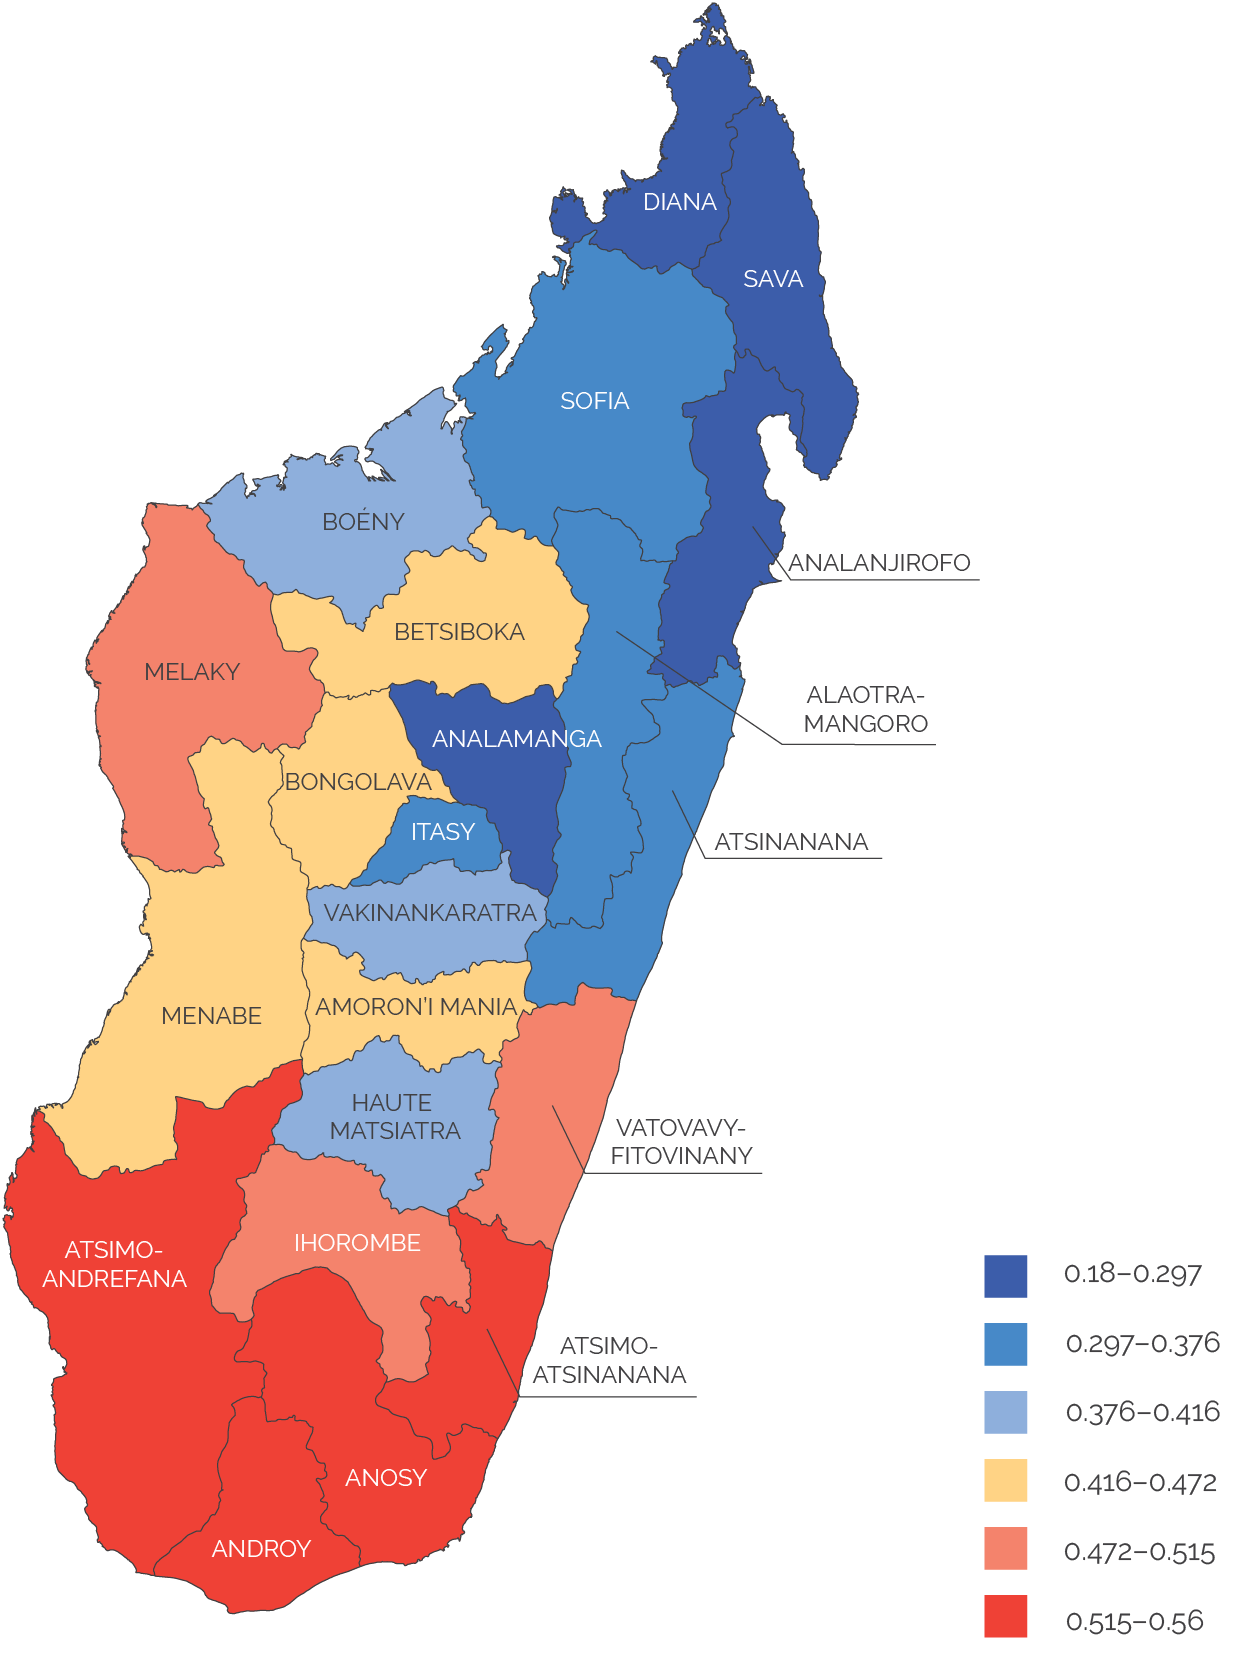 A map of subnational poverty rates in Madagascar demonstrating the higher incidence of poverty in the south.